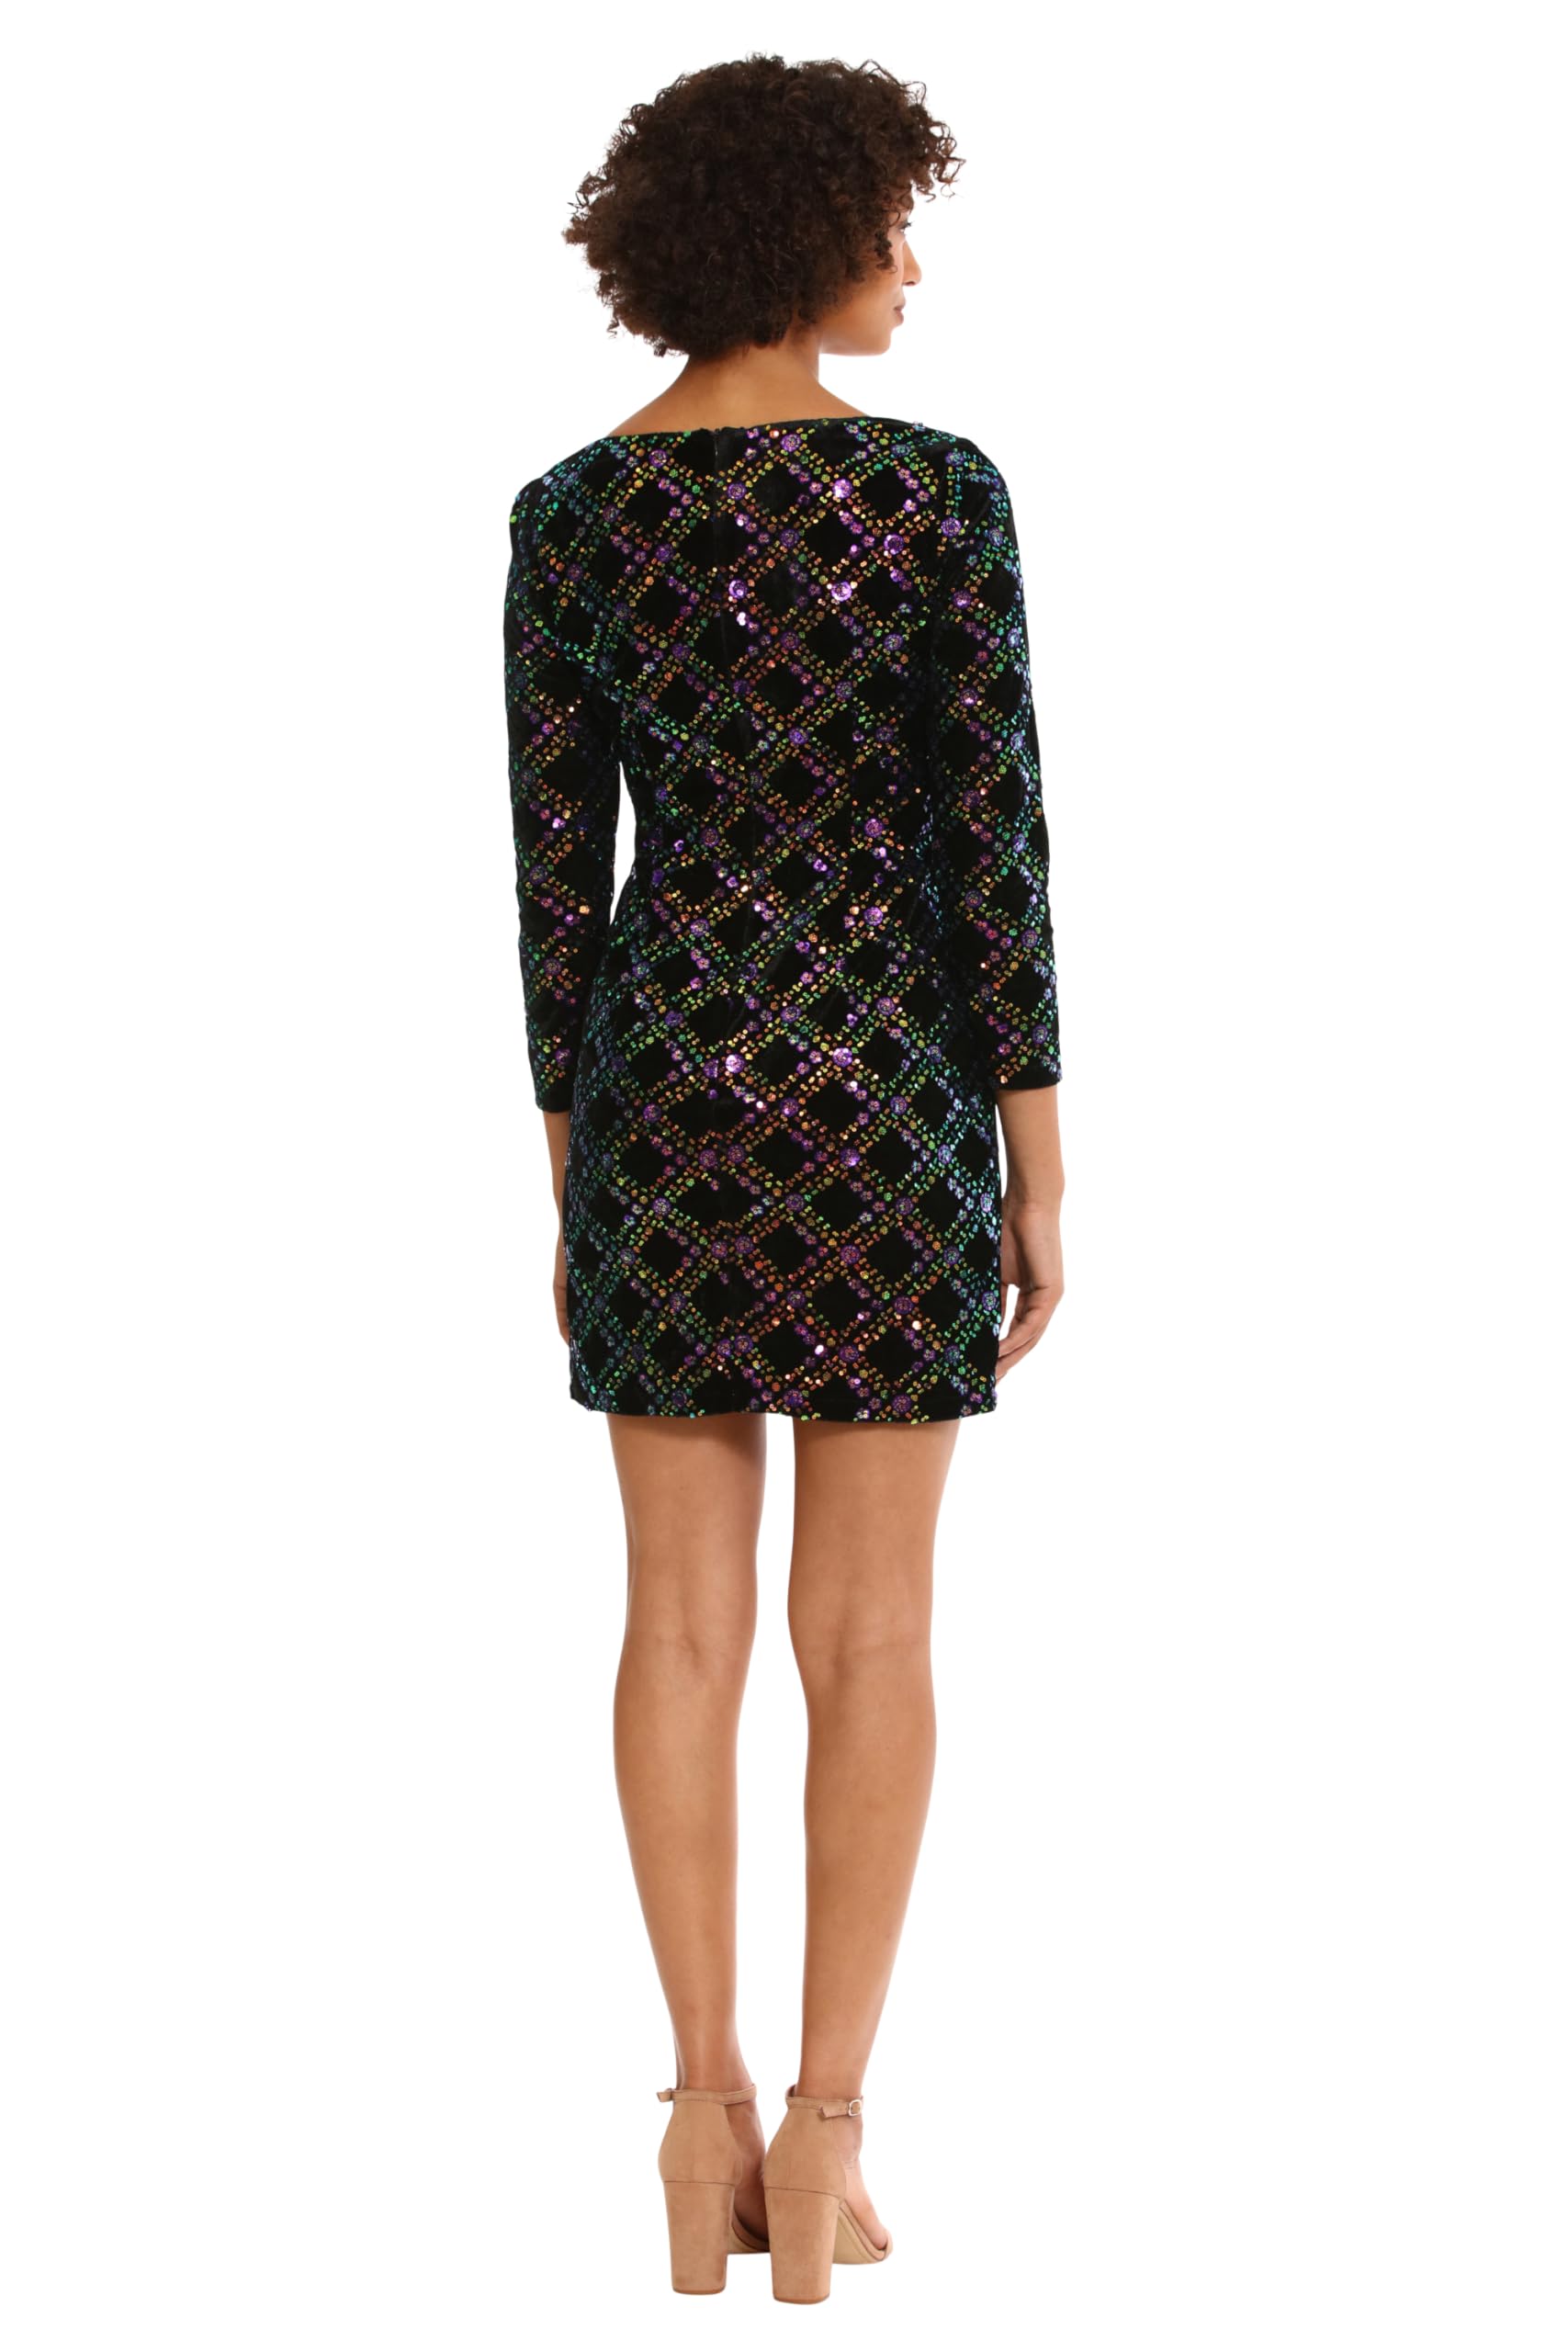 Donna Morgan Women's Holiday Sequin Dress Event Occasion Cocktail Party Guest of